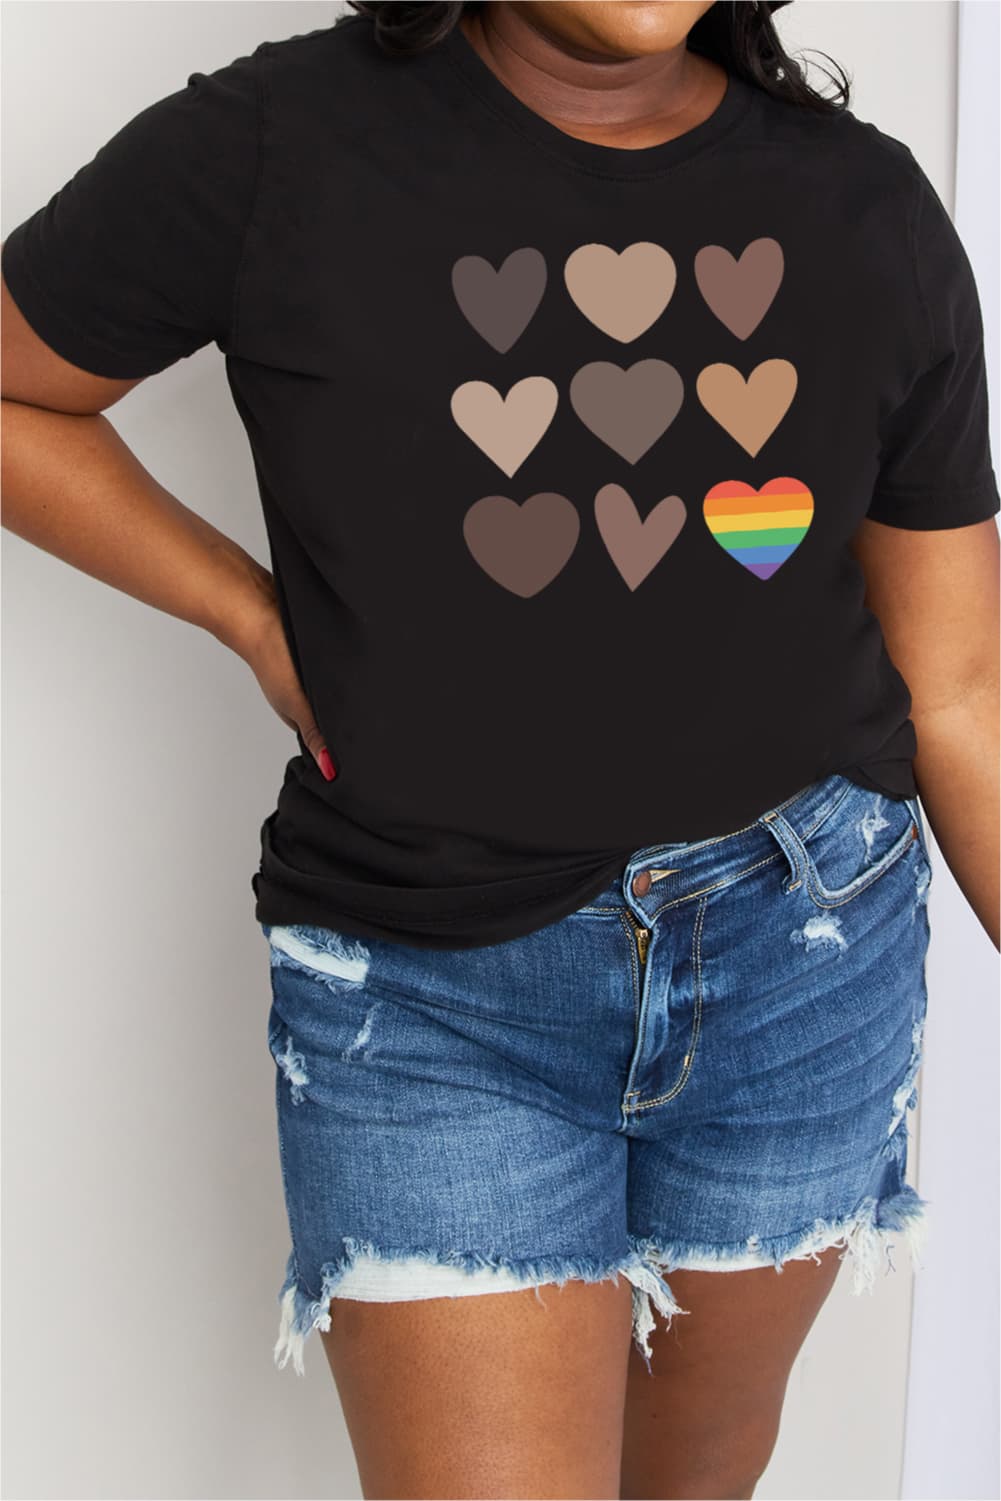 Full Size Heart Graphic Cotton Tee - Black / S - T-Shirts - Shirts & Tops - 12 - 2024